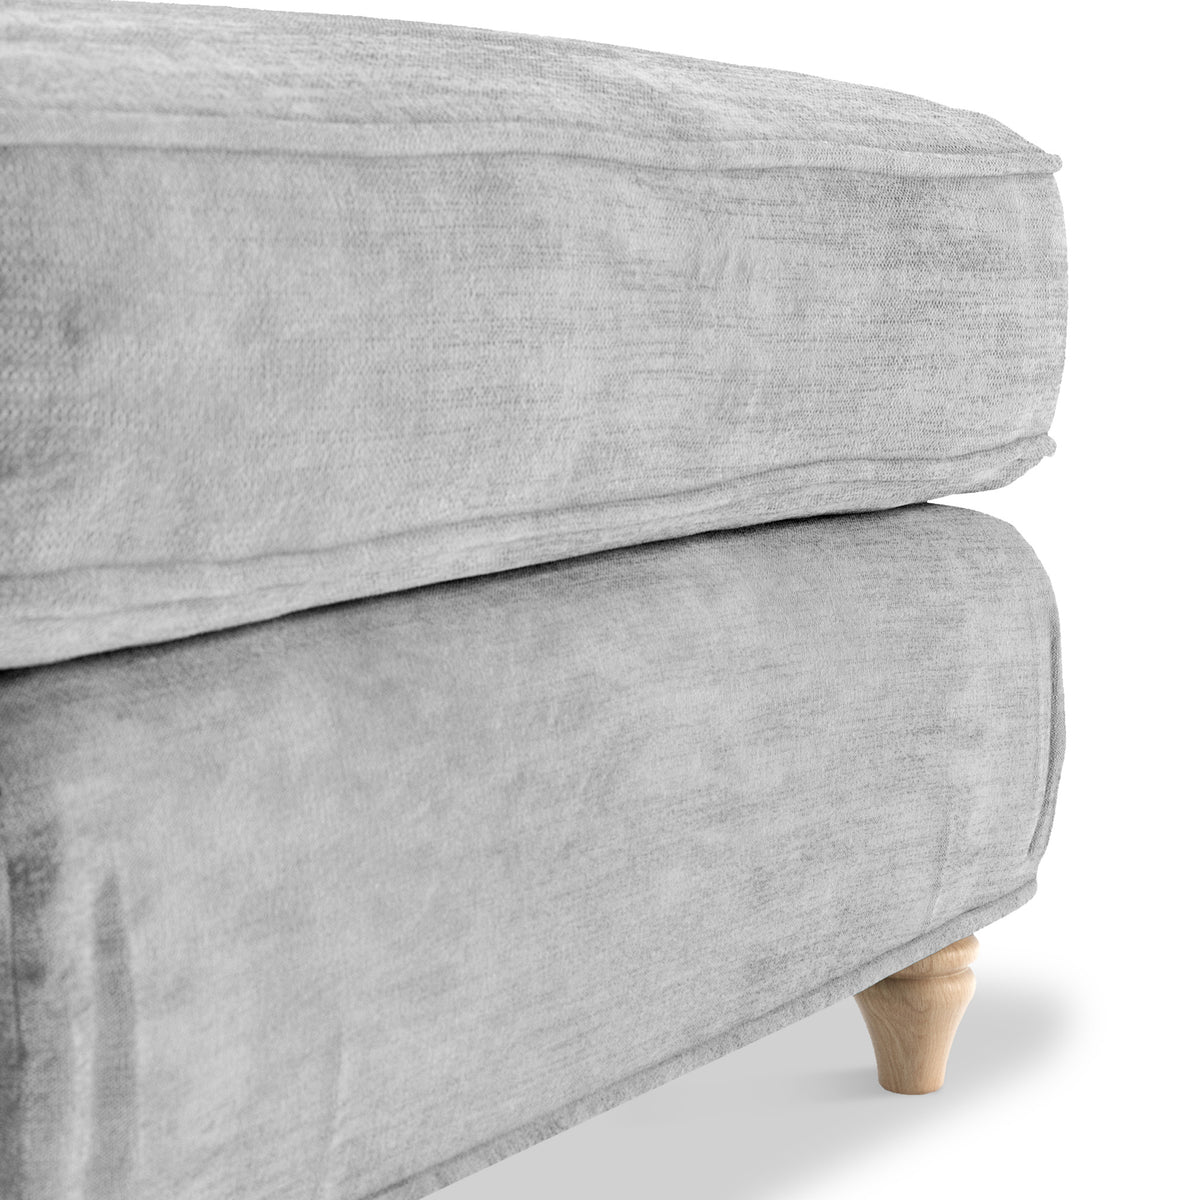 Alfie and Arthur Ice Grey Universal Footstool from Roseland Furniture